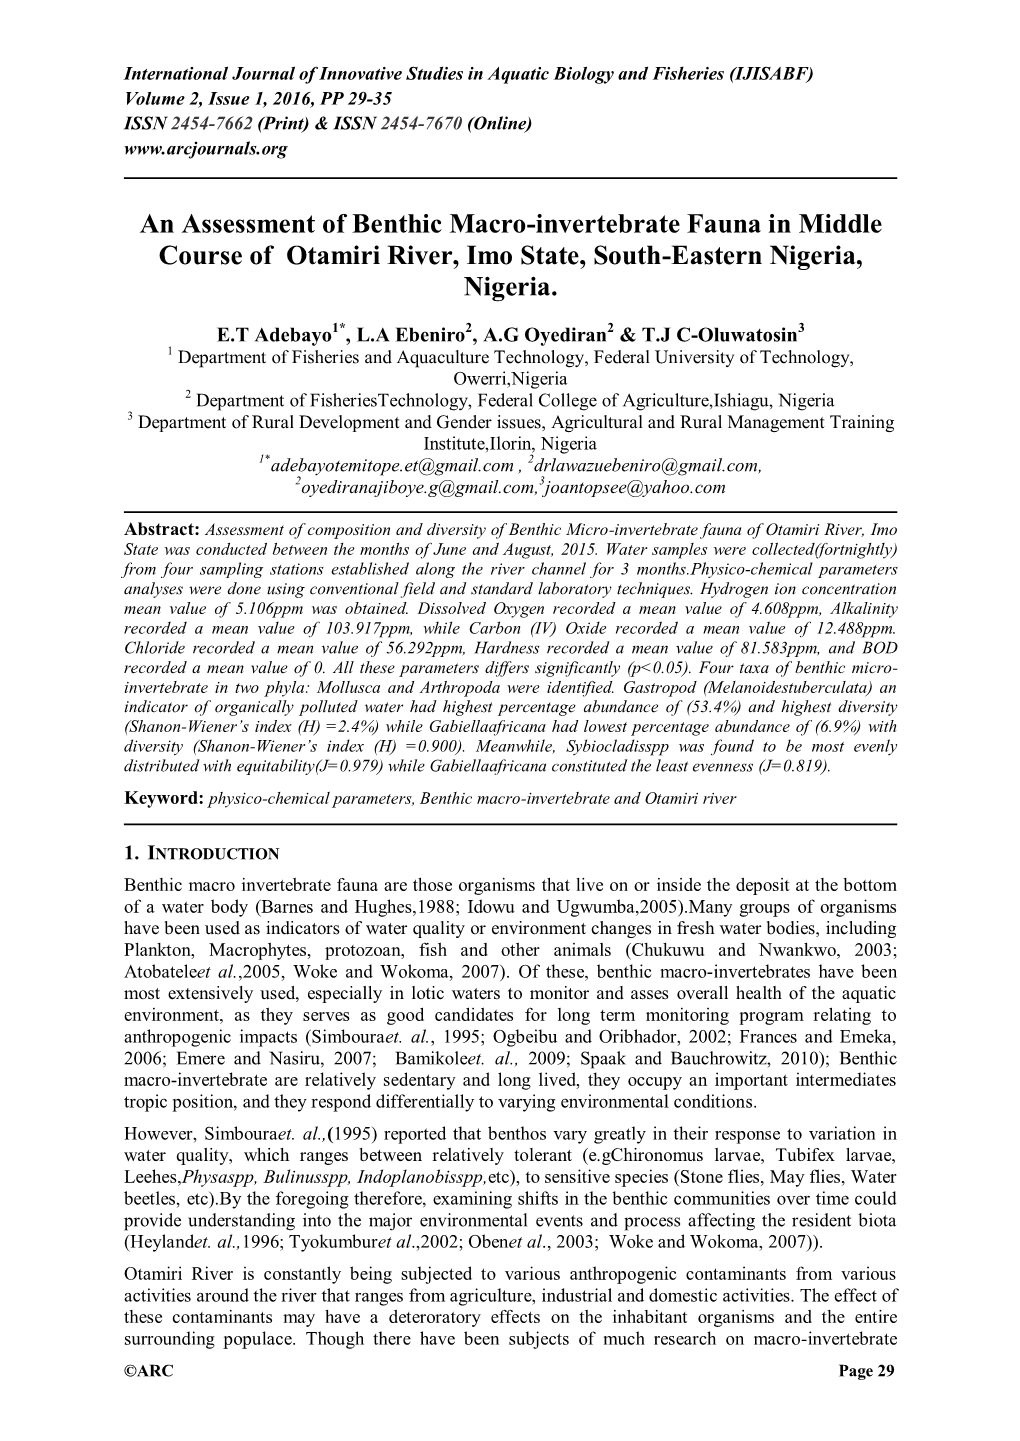 An Assessment of Benthic Macro-Invertebrate Fauna in Middle Course of Otamiri River, Imo State, South-Eastern Nigeria, Nigeria